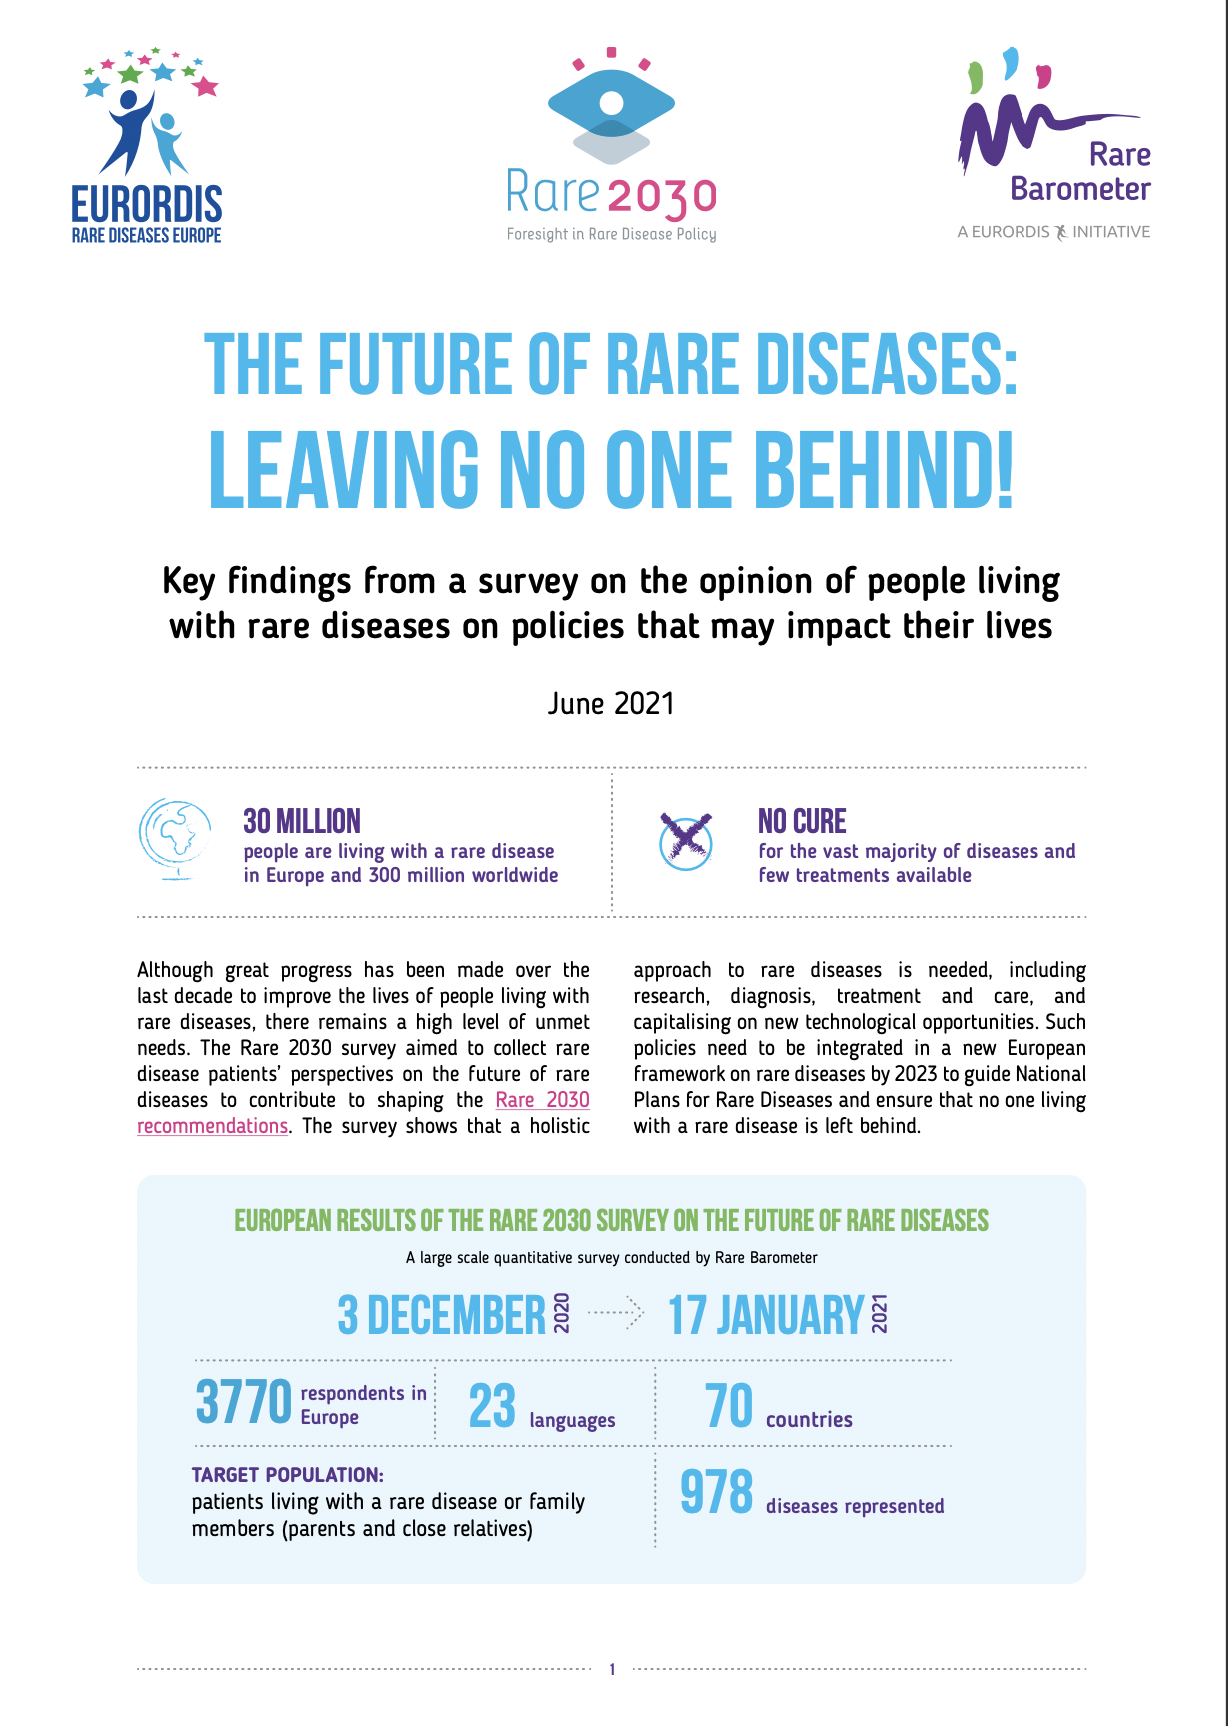 The future of rare diseases: Leaving no one behind!